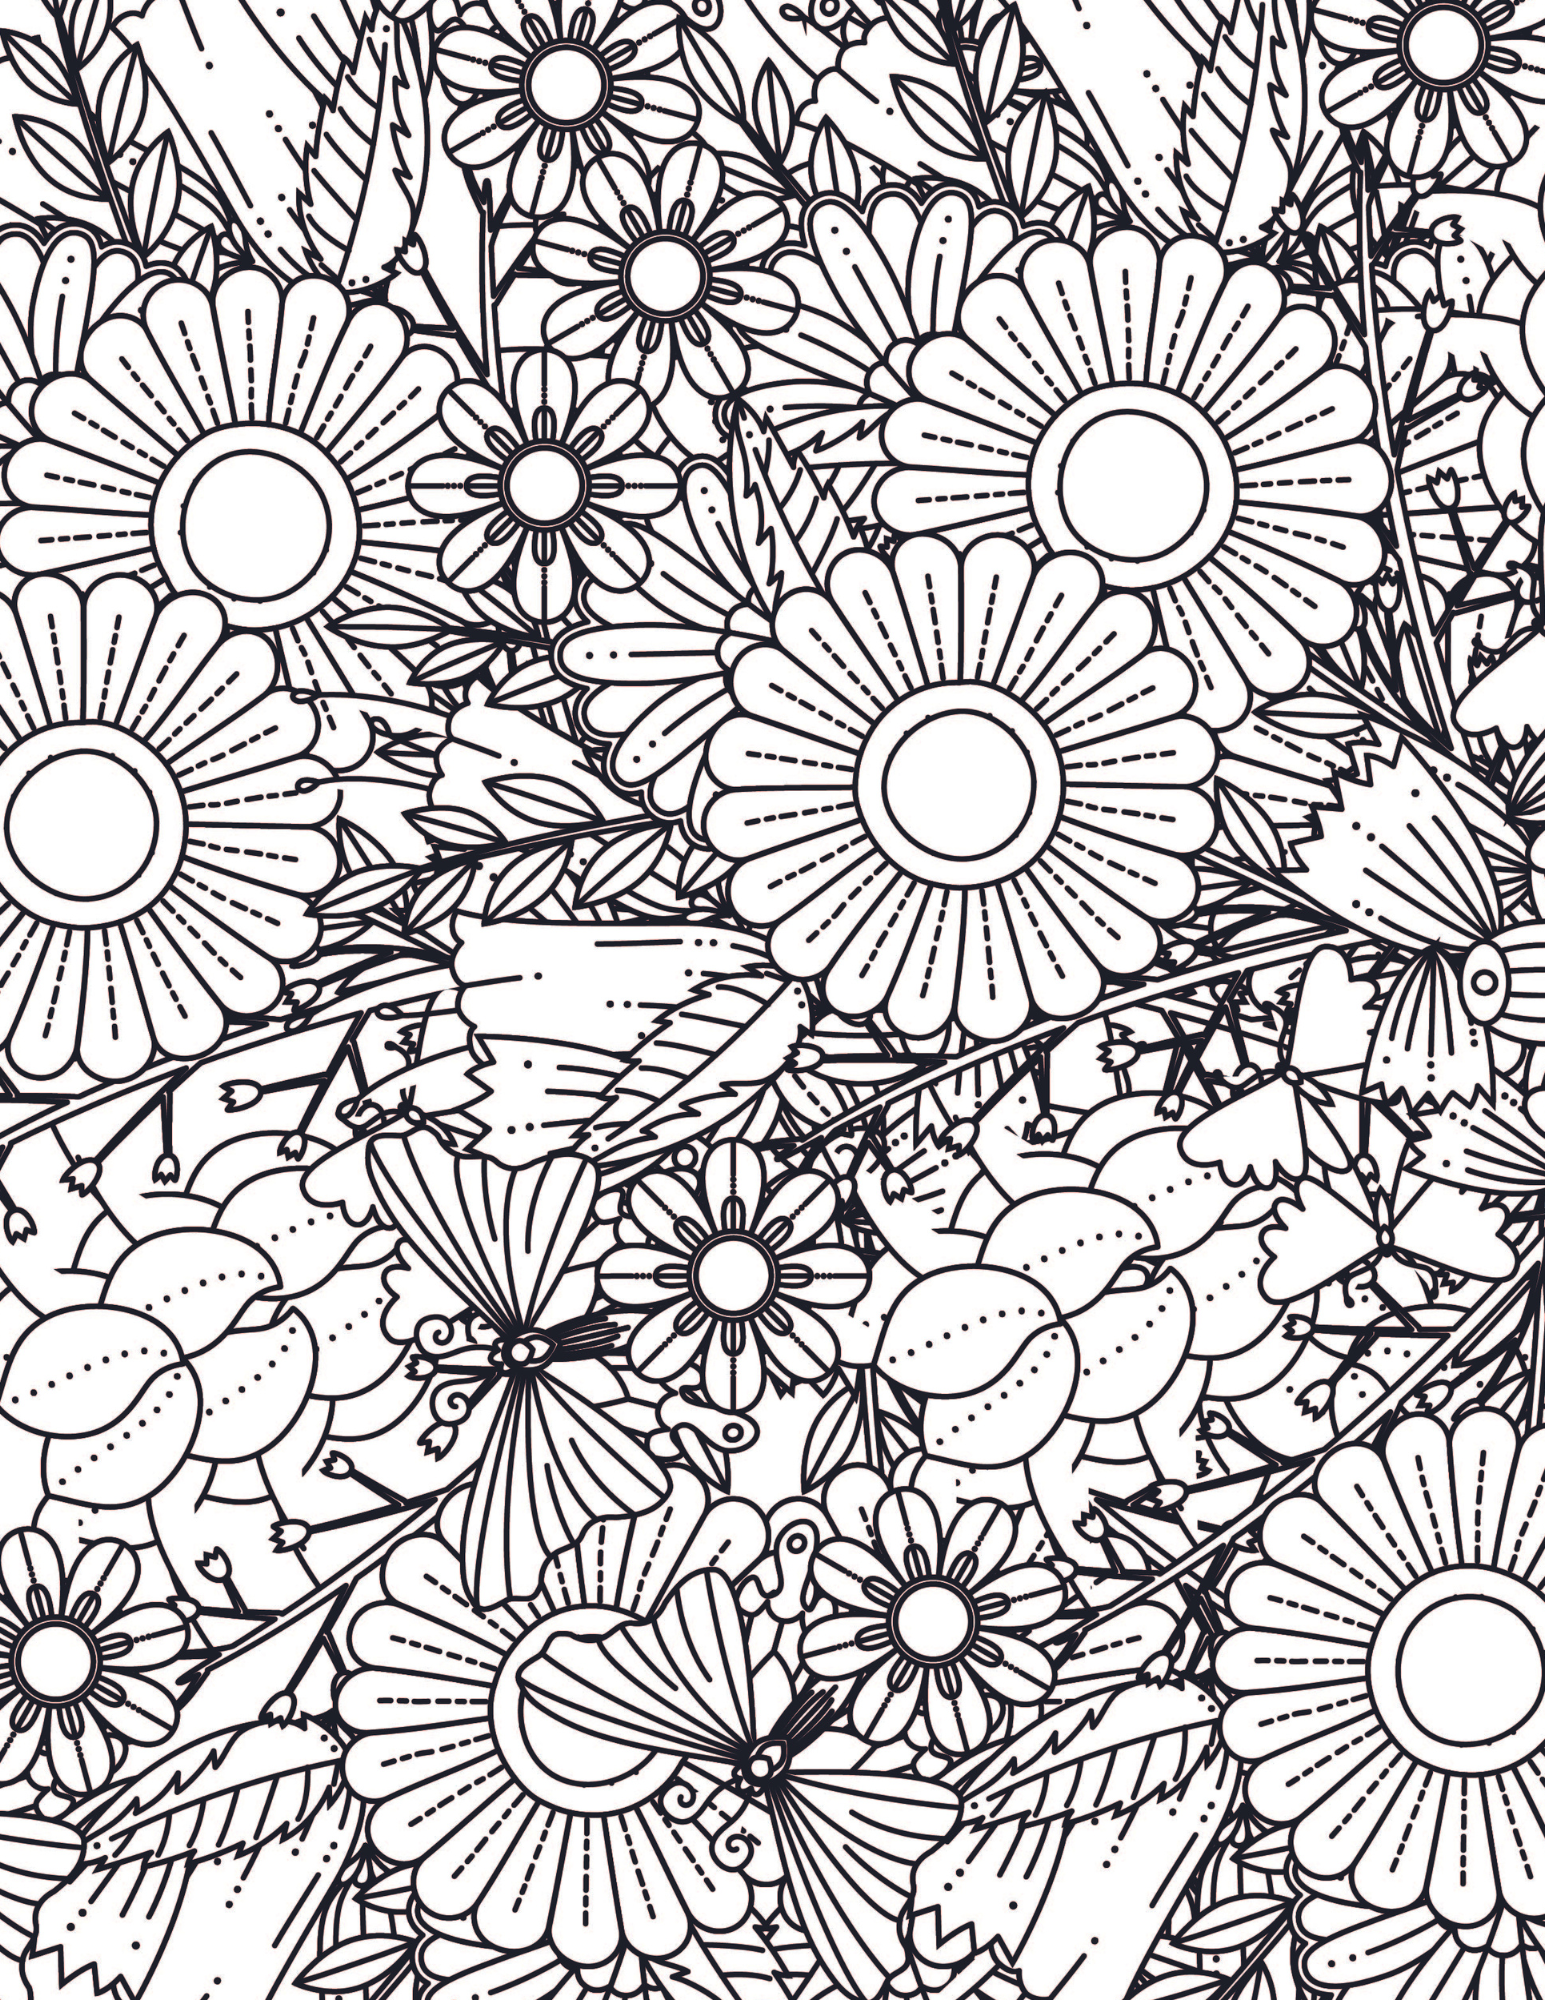 Free sunflower coloring pages for adults and kids